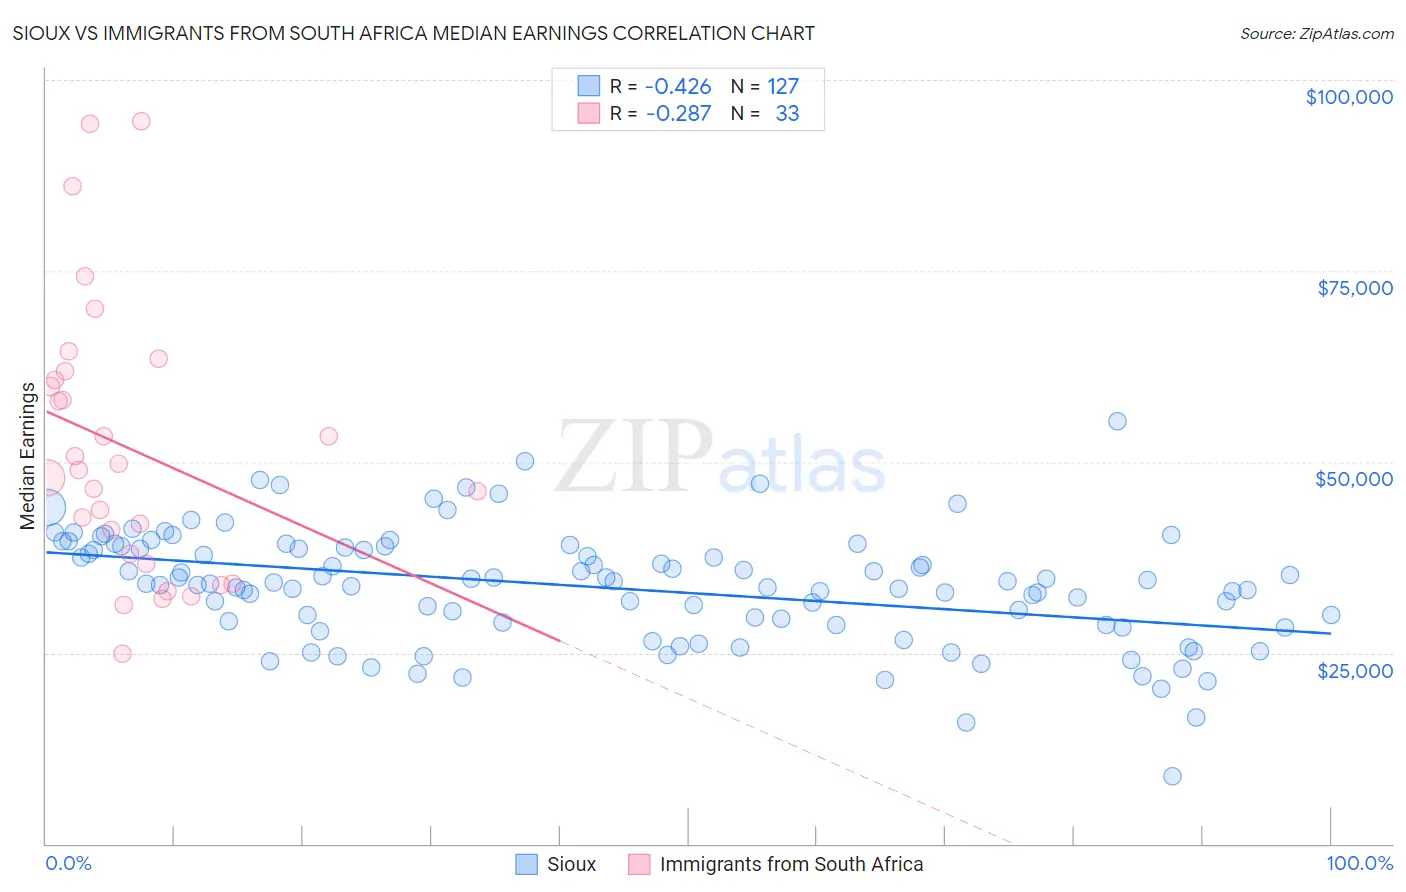 Sioux vs Immigrants from South Africa Median Earnings